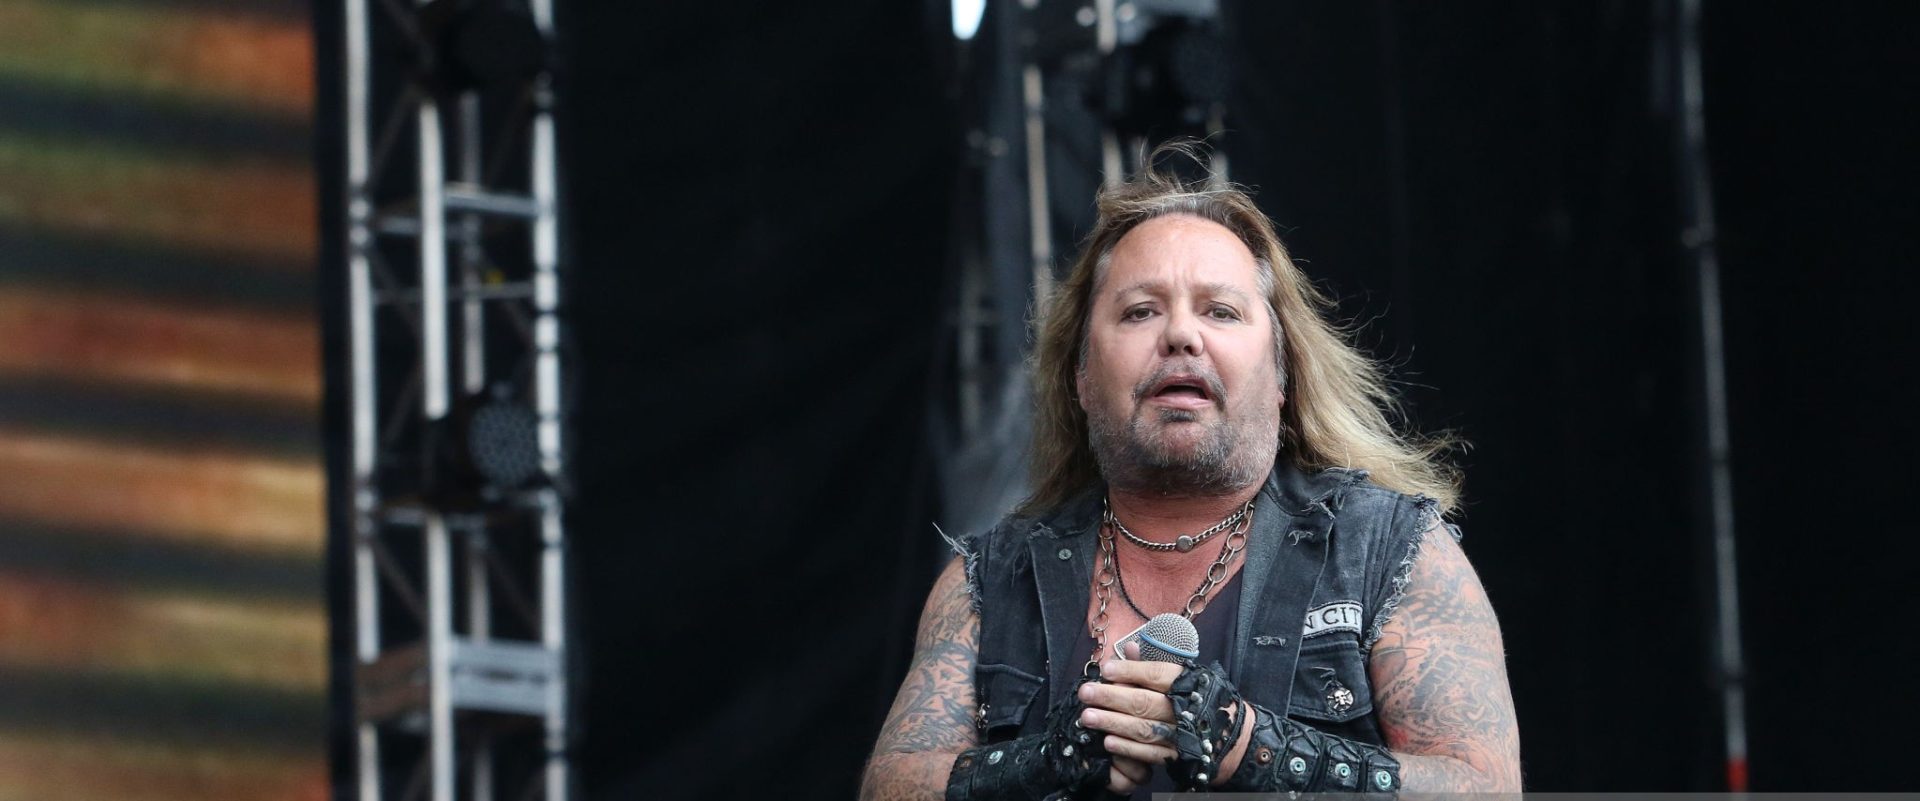 Vince Neil Net Worth How Much Does The Musician Make?